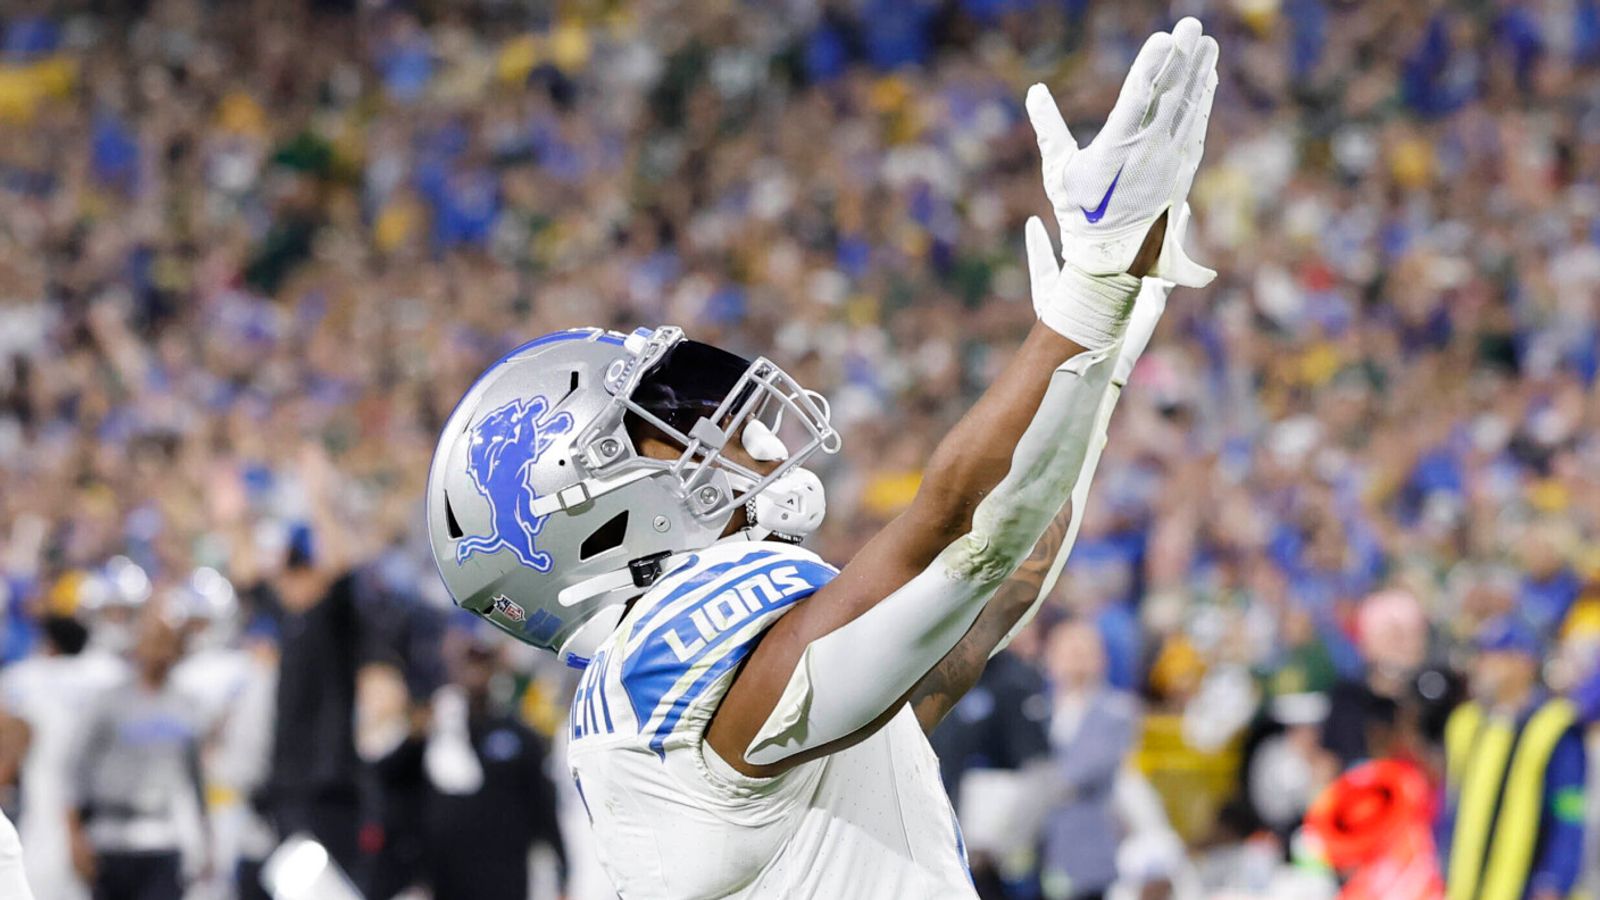 Detroit Lions 34 vs 20 Green Bay Packers summary, stats, score and  highlights